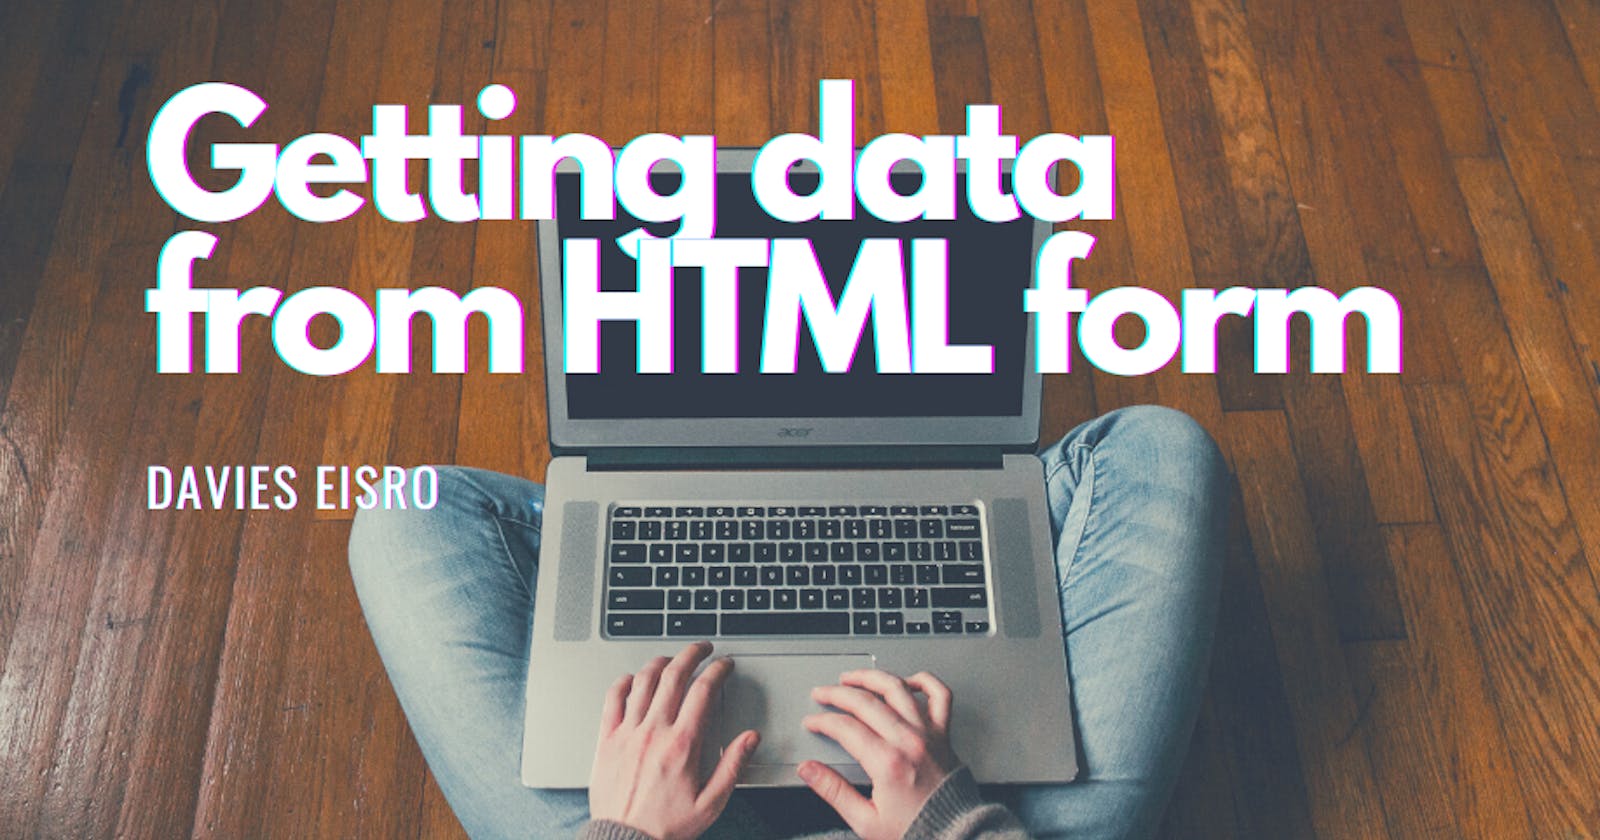 Tips on getting data from HTML forms